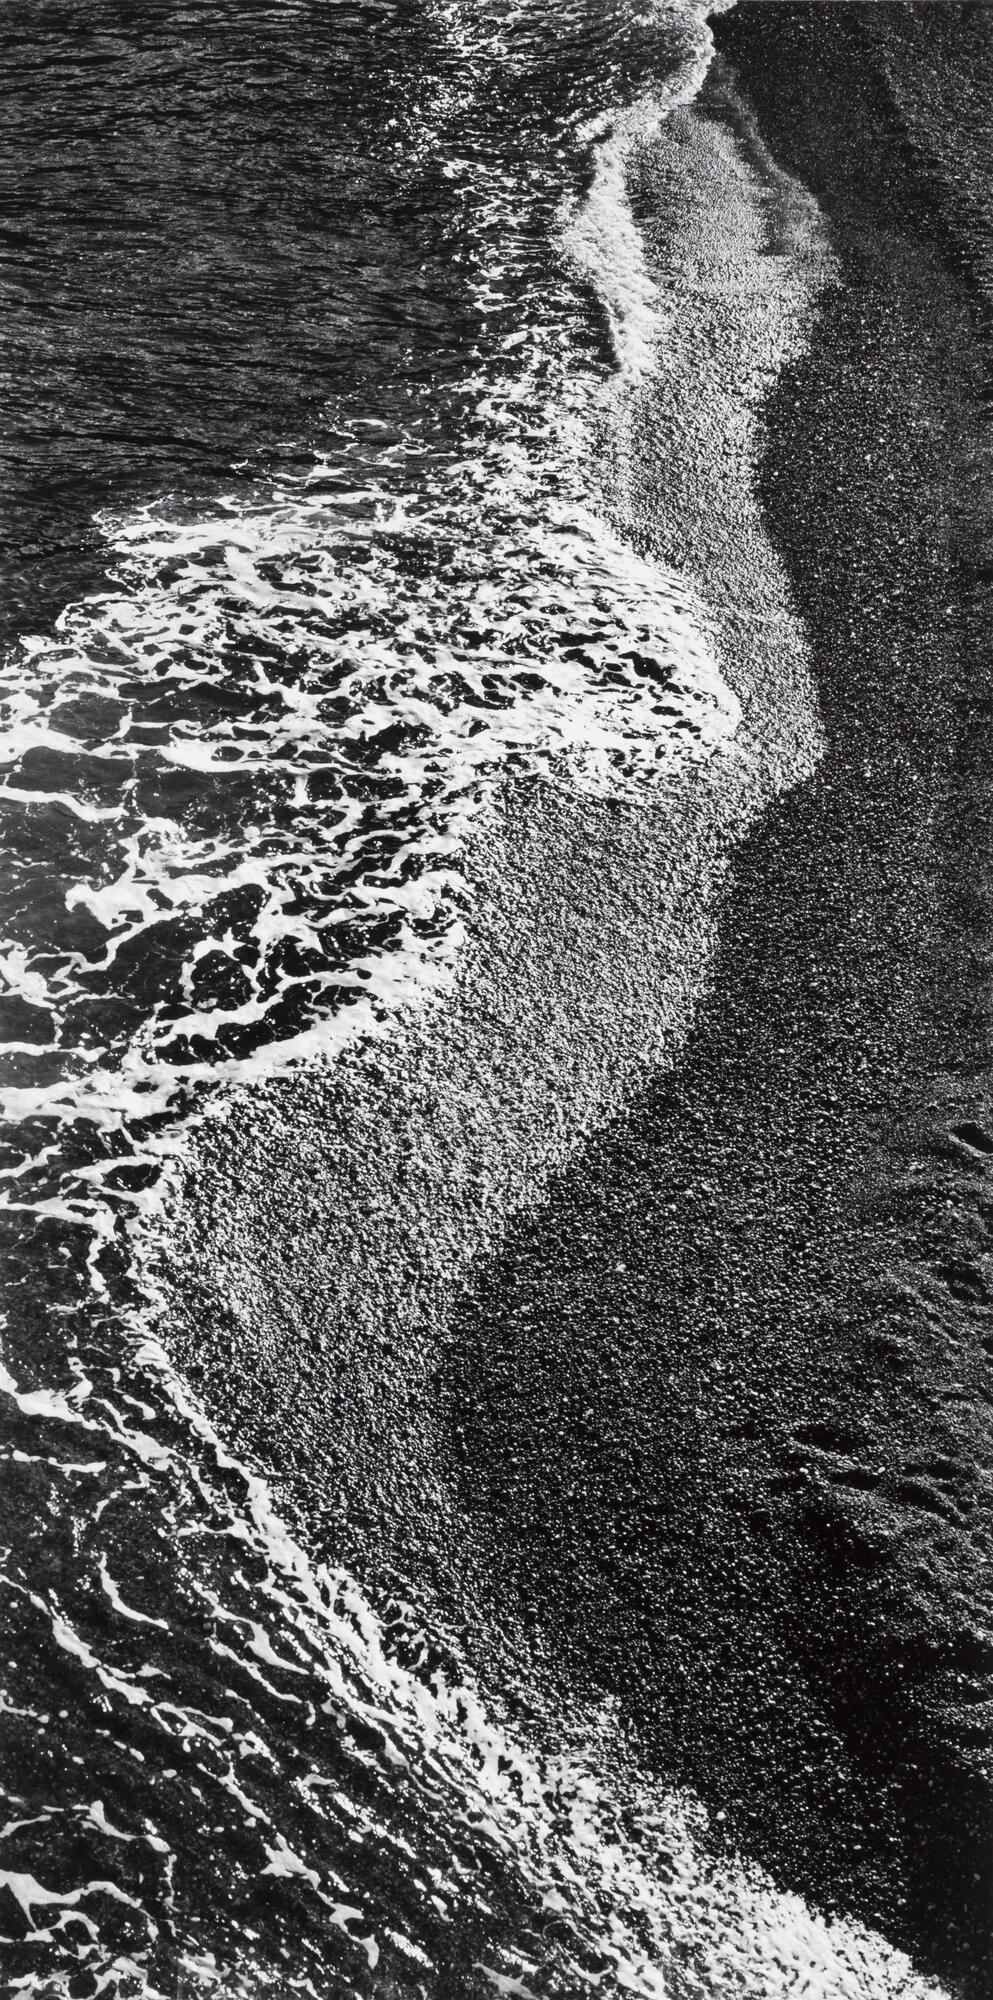 Black and white photograph of waves crashing on a beach.&nbsp;